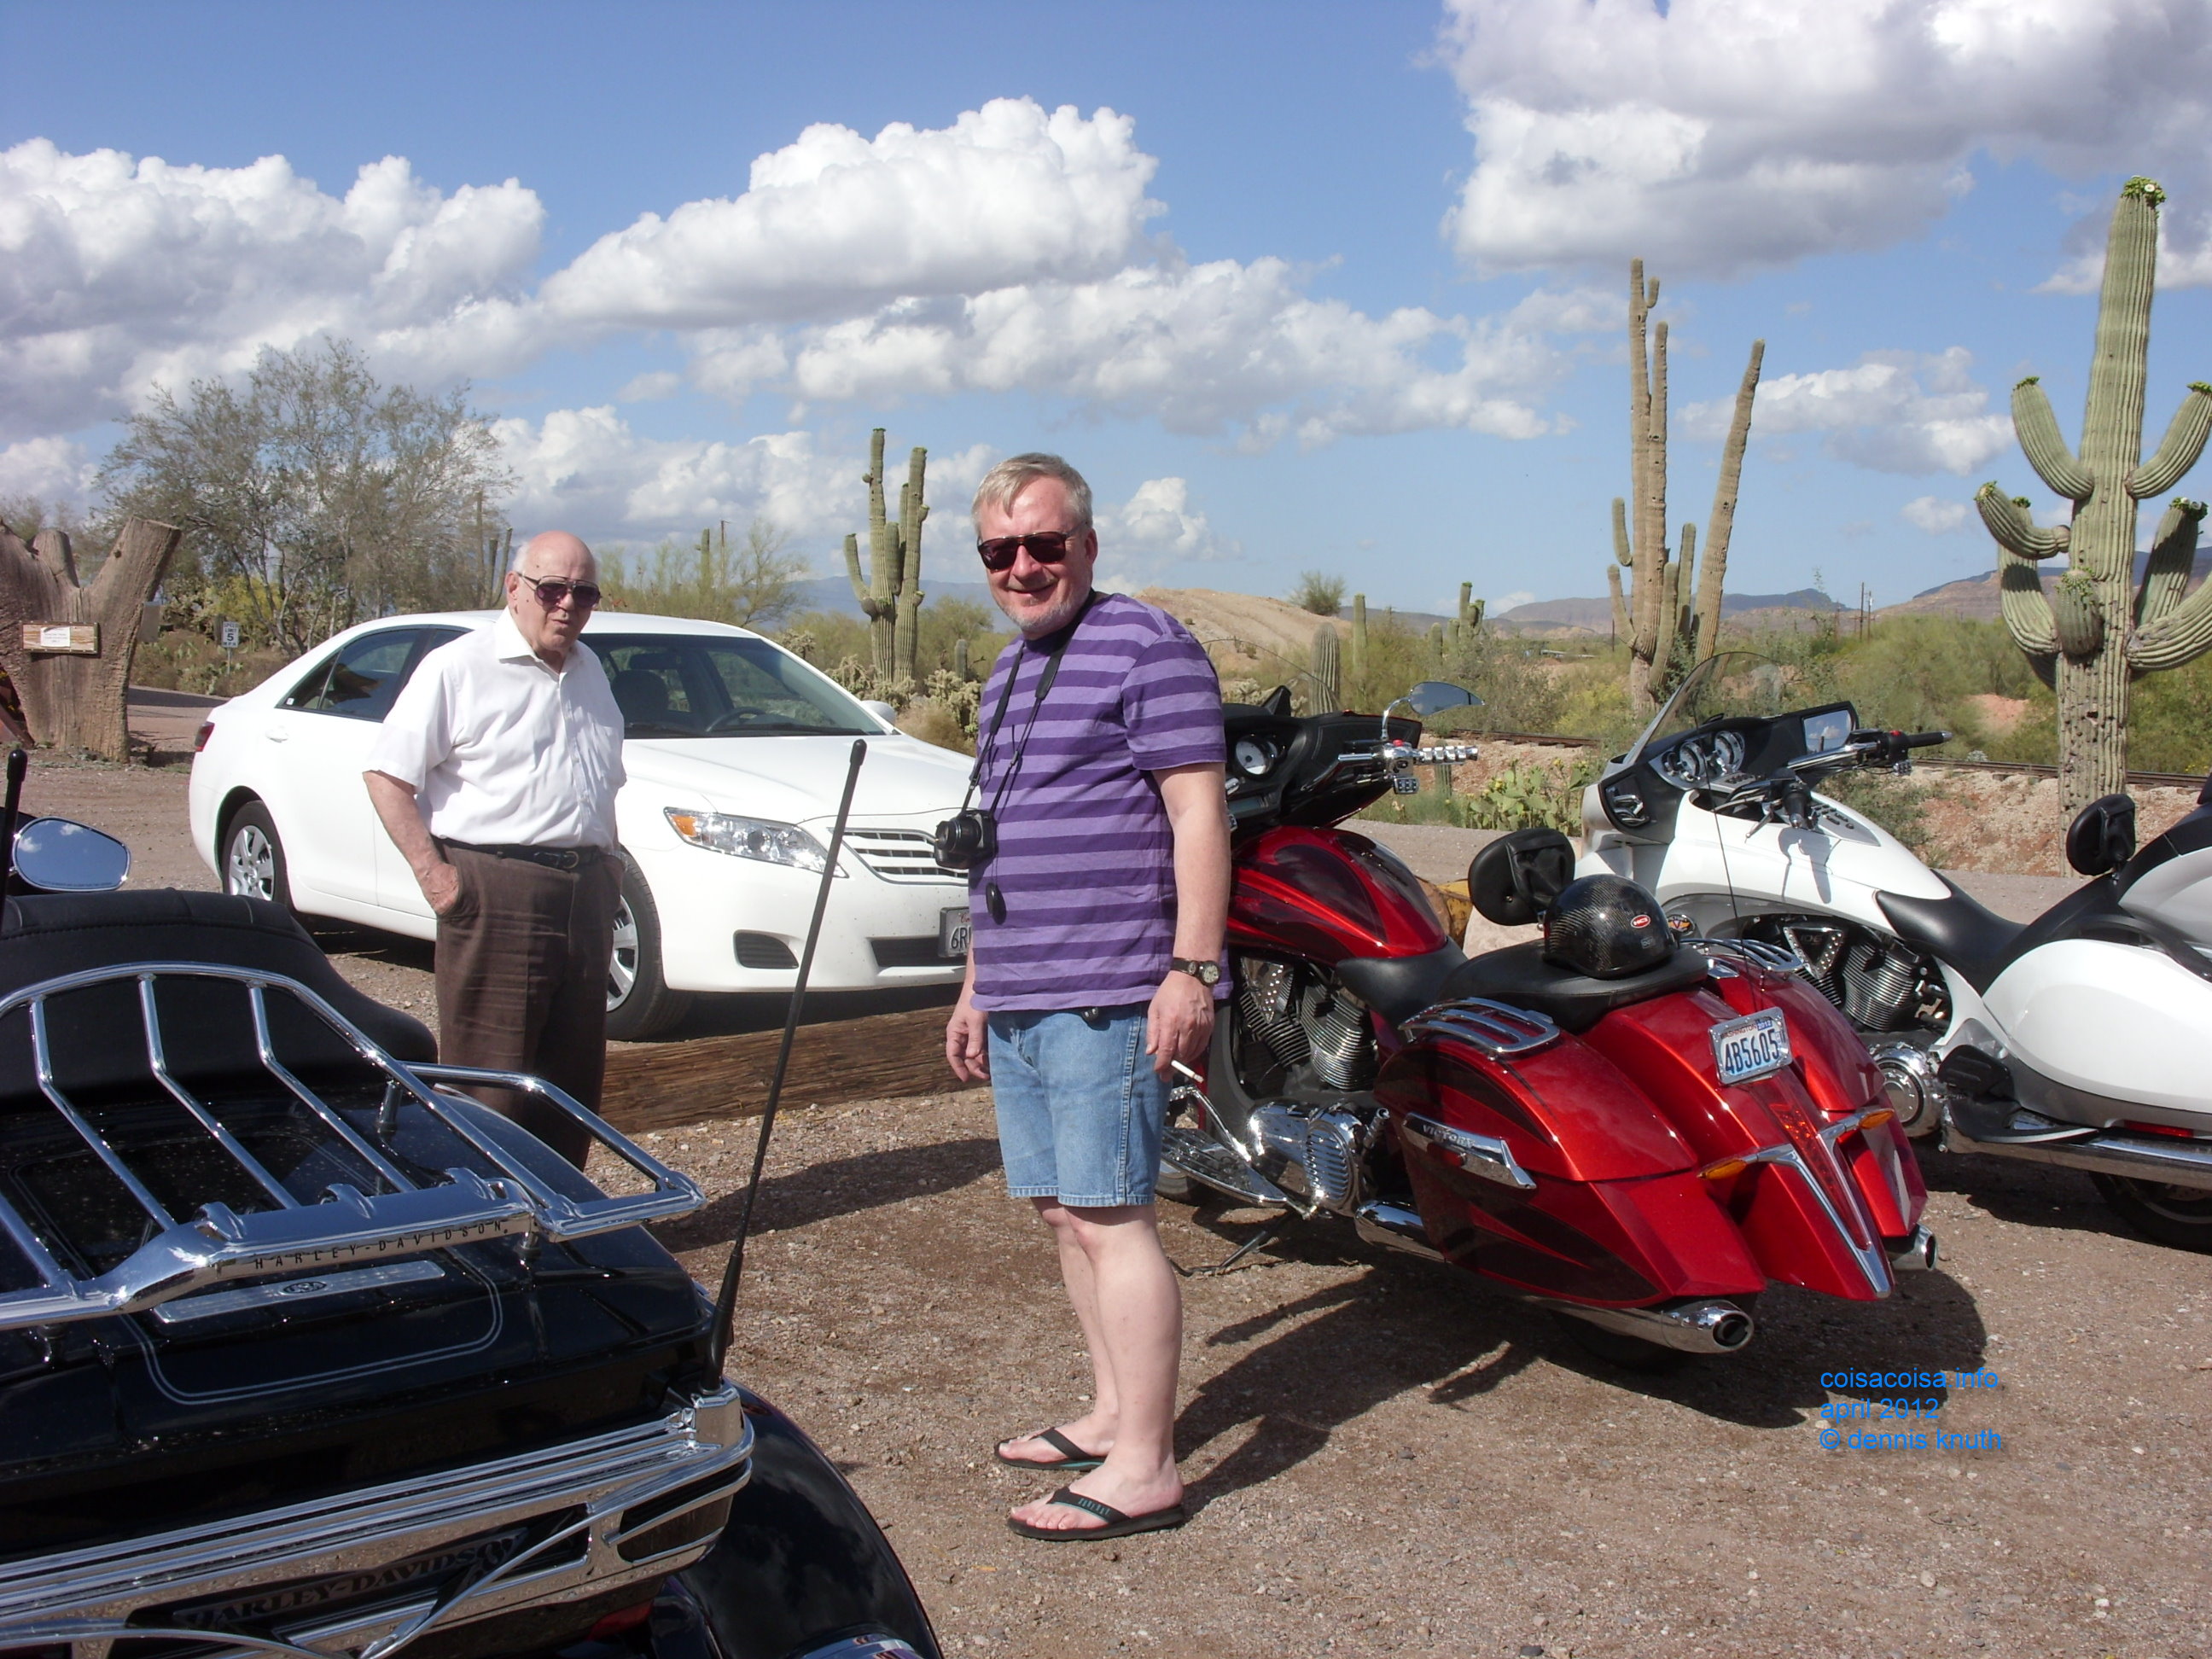 2012_04_26_e_apache_junction_ghost_town_0010.jpg (large)